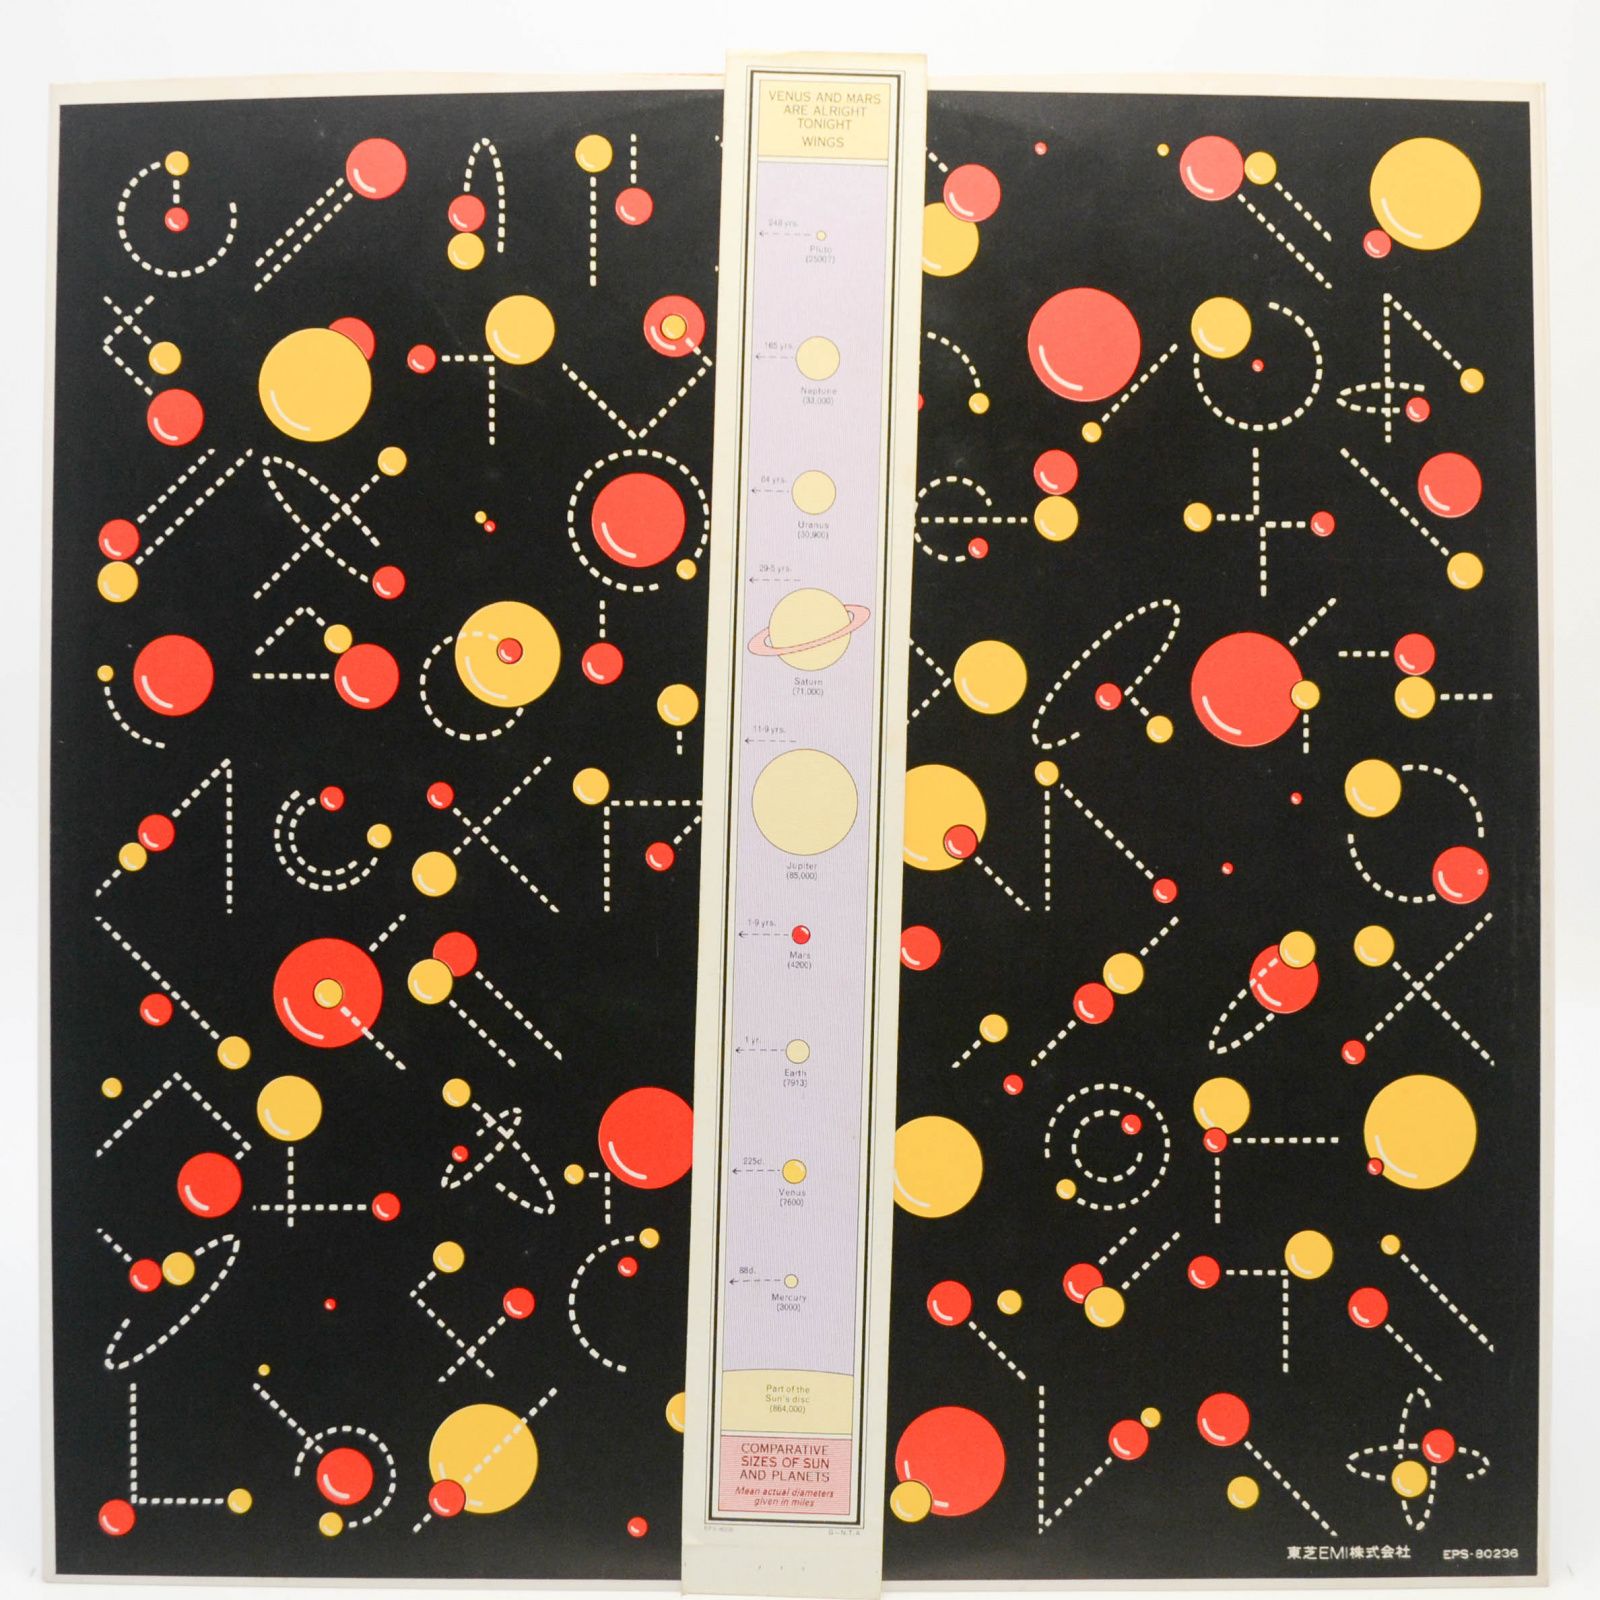 Wings — Venus And Mars (2 posters, 1 sticker), 1975